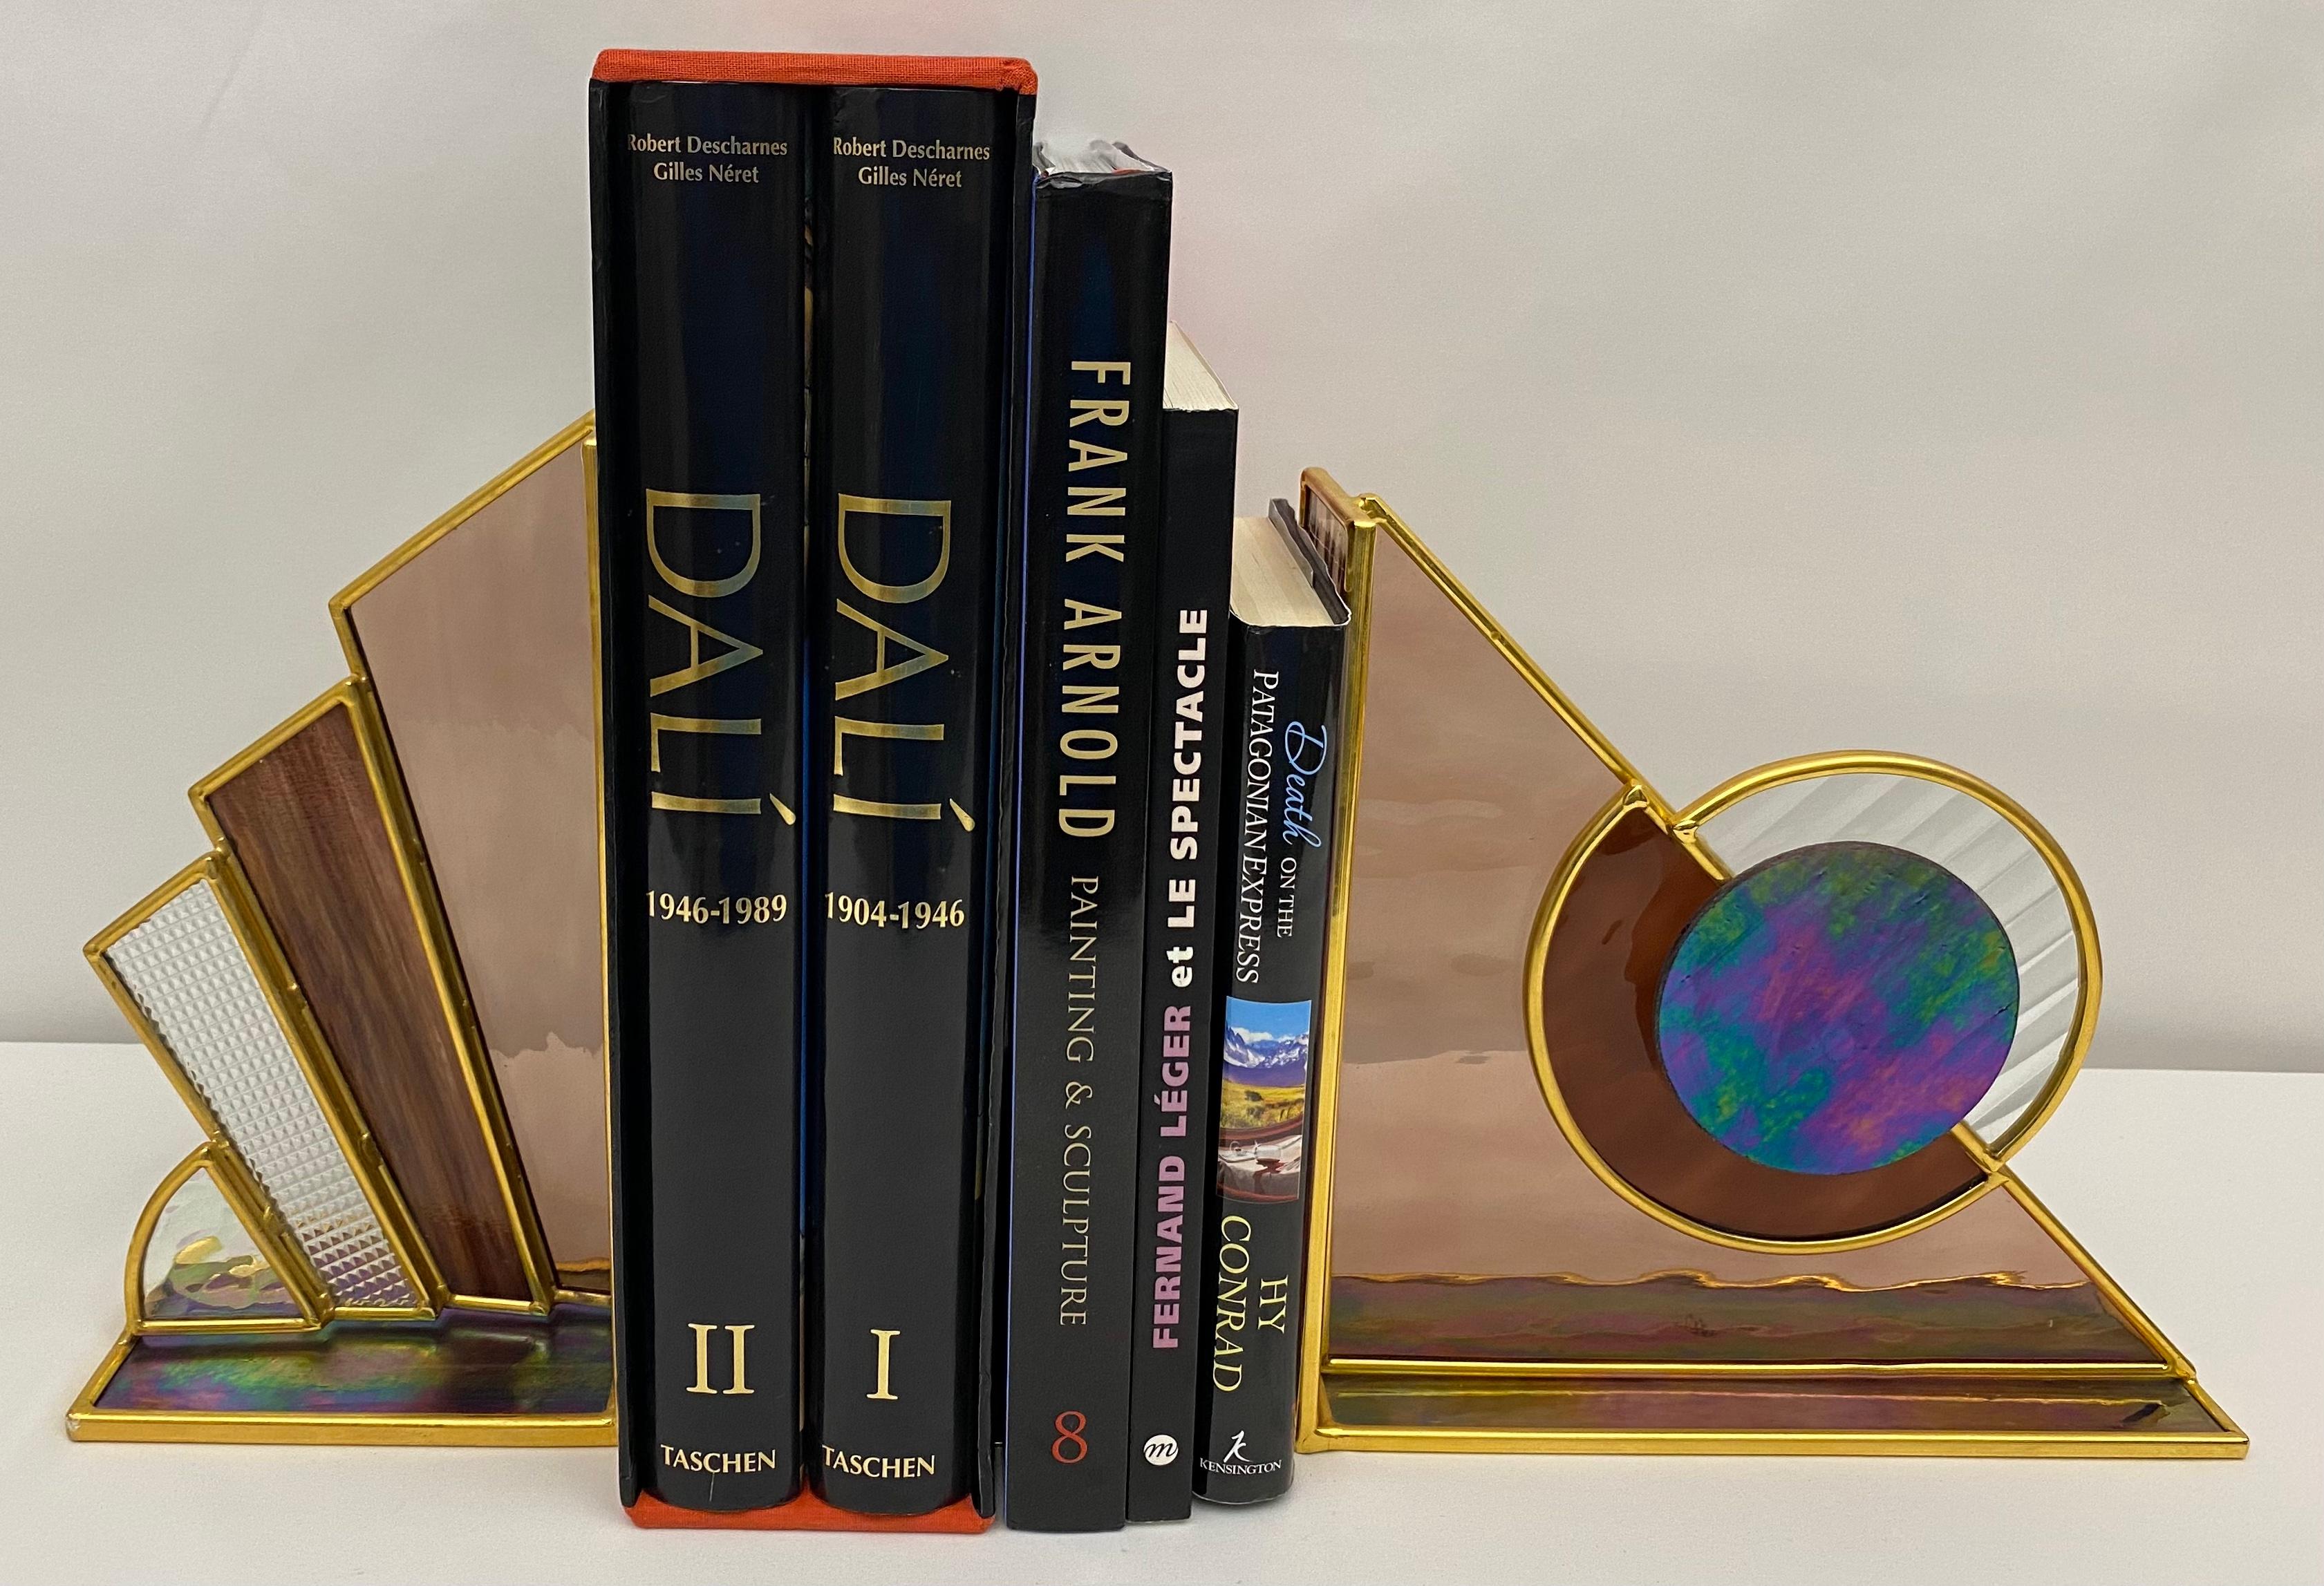 A pair of stained glass and brass bookends, good quality. 
Stunning in design, optics and color.
 
Perfect for displaying your favorite books on any shelf, dresser, table or countertop. Makes a very nice gift for oneself or others. 

Largest one